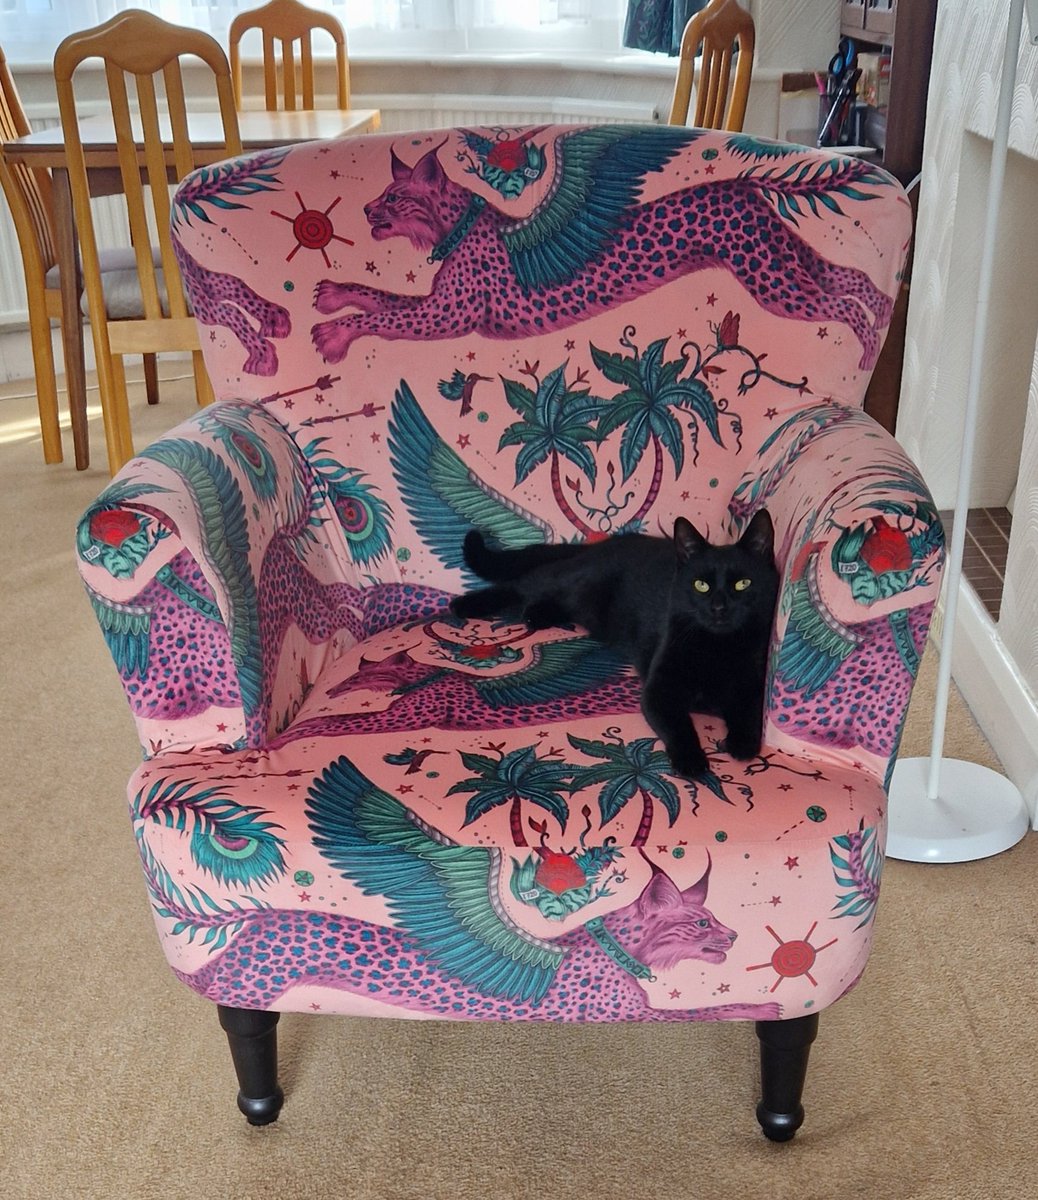 Different cat, same chair (and fabulous painting)